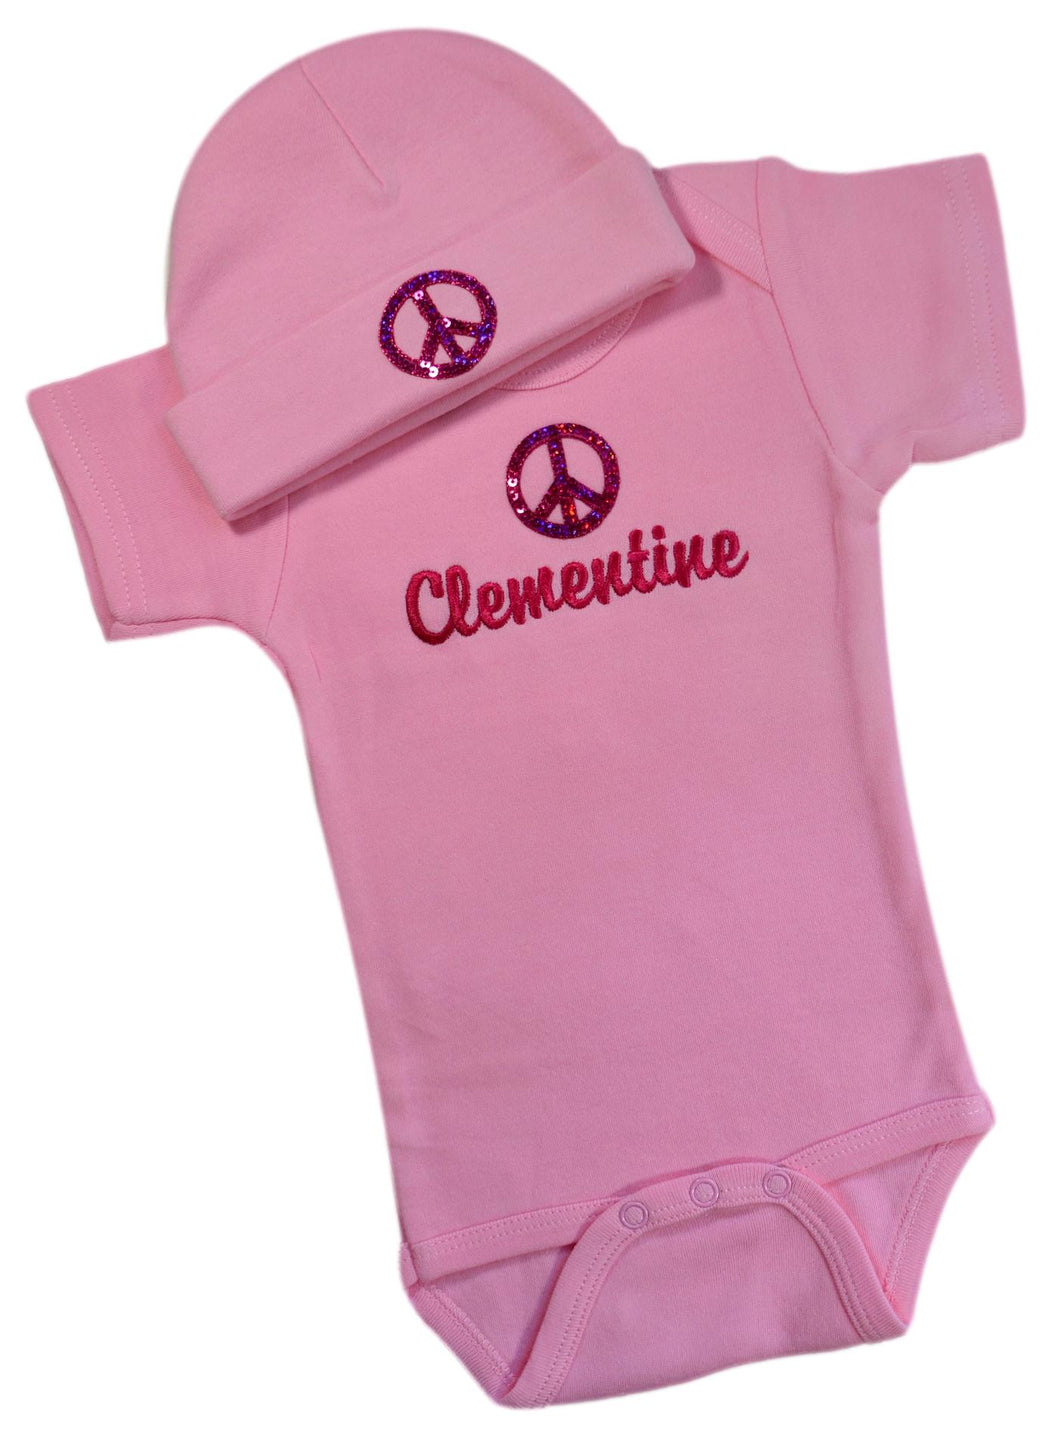 Personalized Embroidered Baby Girls PEACE SIGN Bodysuit with Matching Cotton Beanie Hat